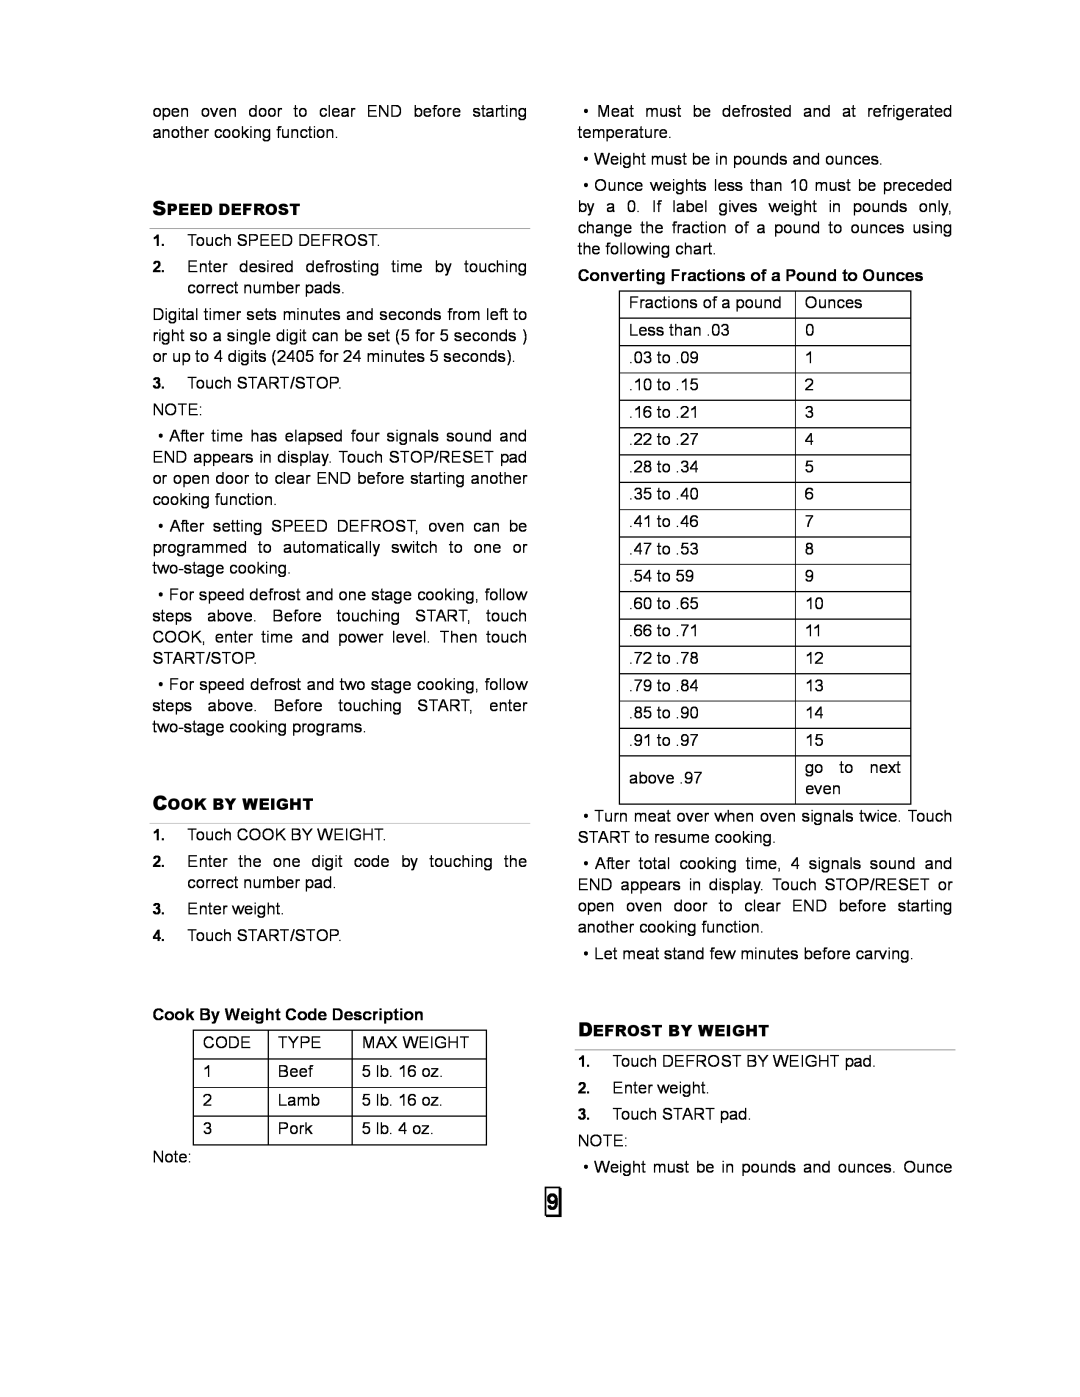 Galaxy Metal Gear 87040 user manual Cook By Weight Code Description, Converting Fractions of a Pound to Ounces 